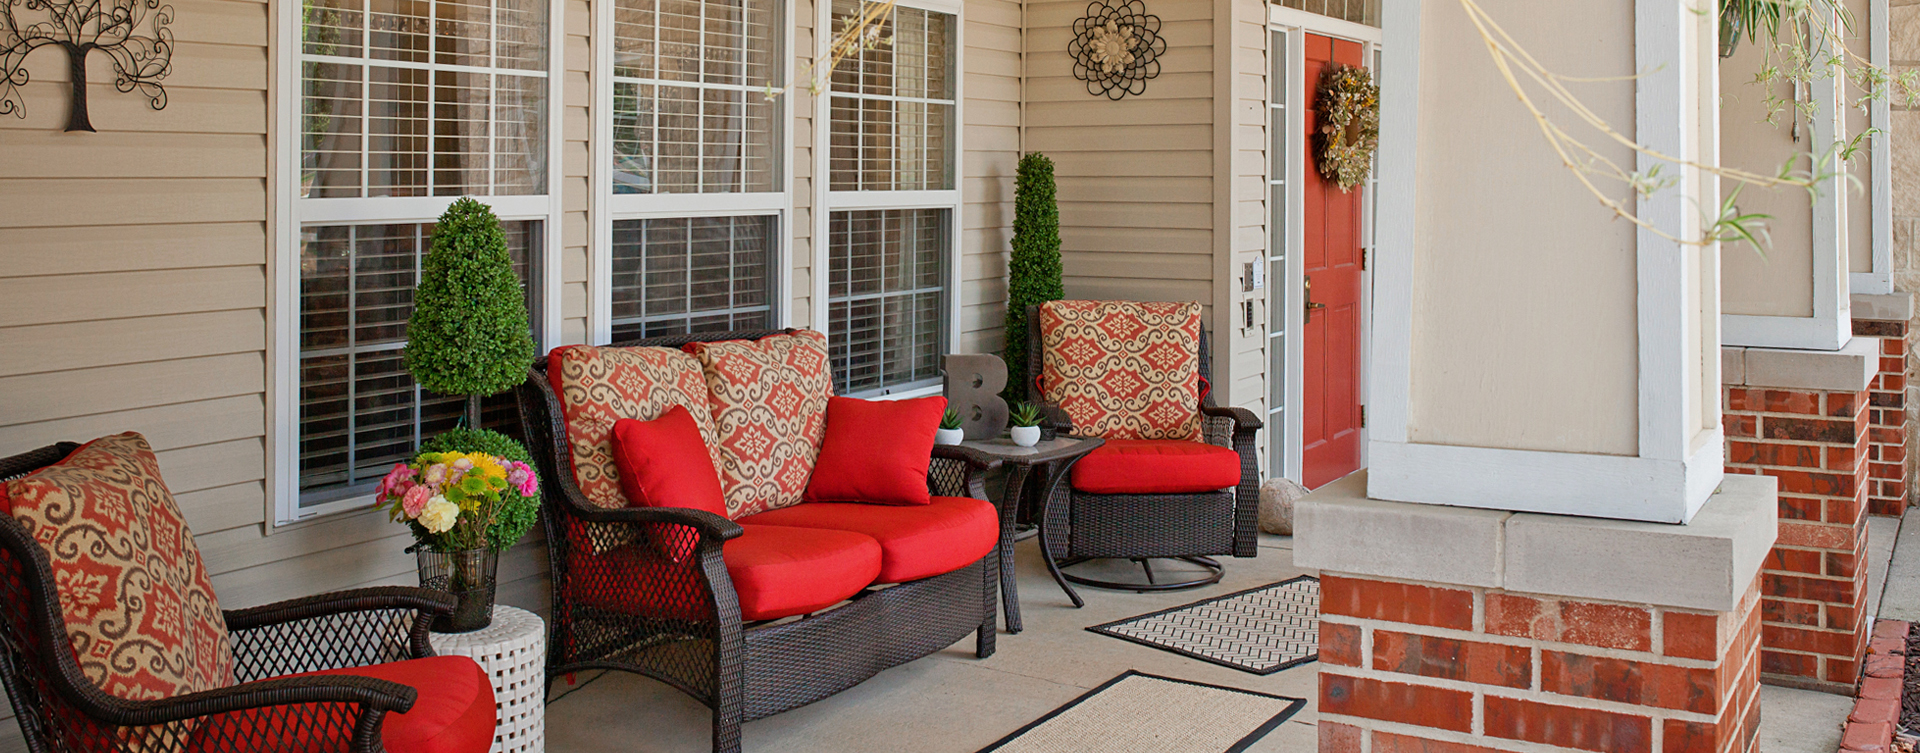 Enjoy conversations with friends on the porch at Bickford of Cedar Falls